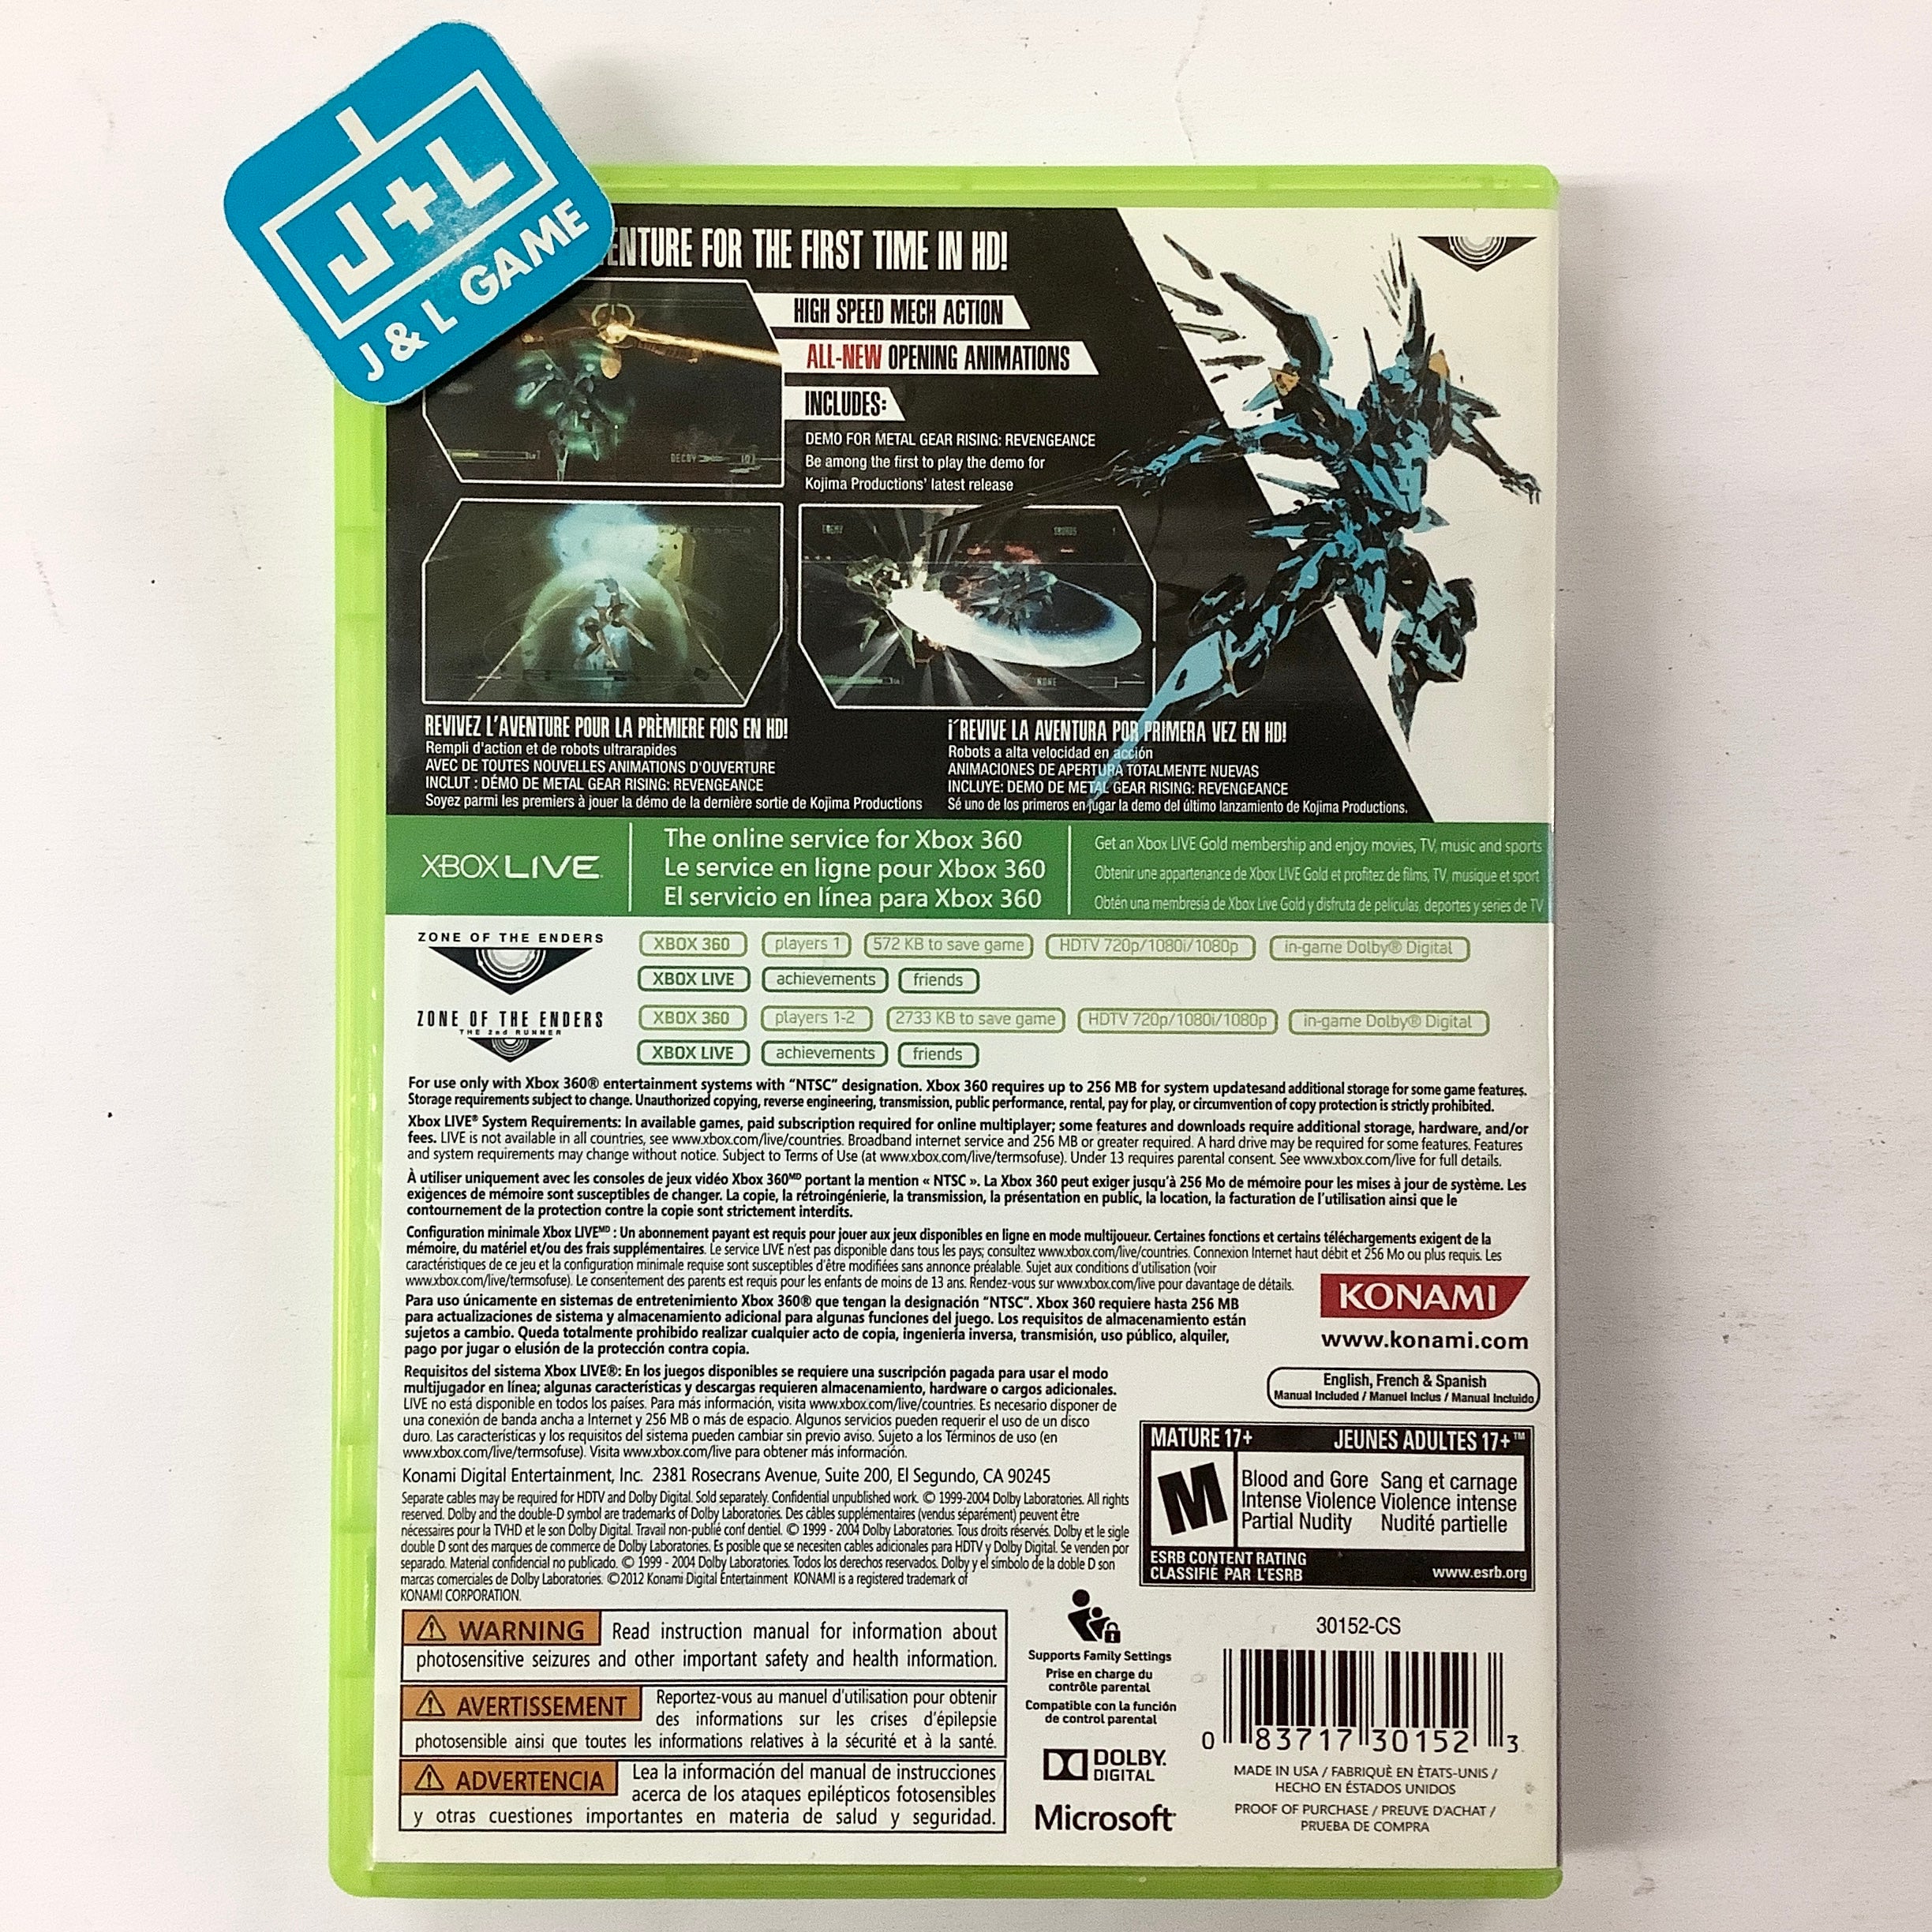 Zone of the Enders HD Collection - Xbox 360 [Pre-Owned] Video Games Konami   